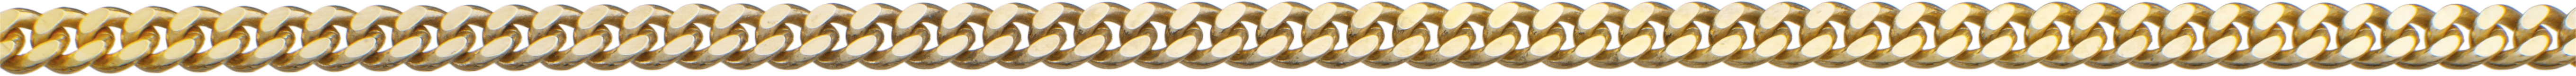 Flat curb chain flat gold 333/-Gg 2.65mm, wire thickness 0.80mm